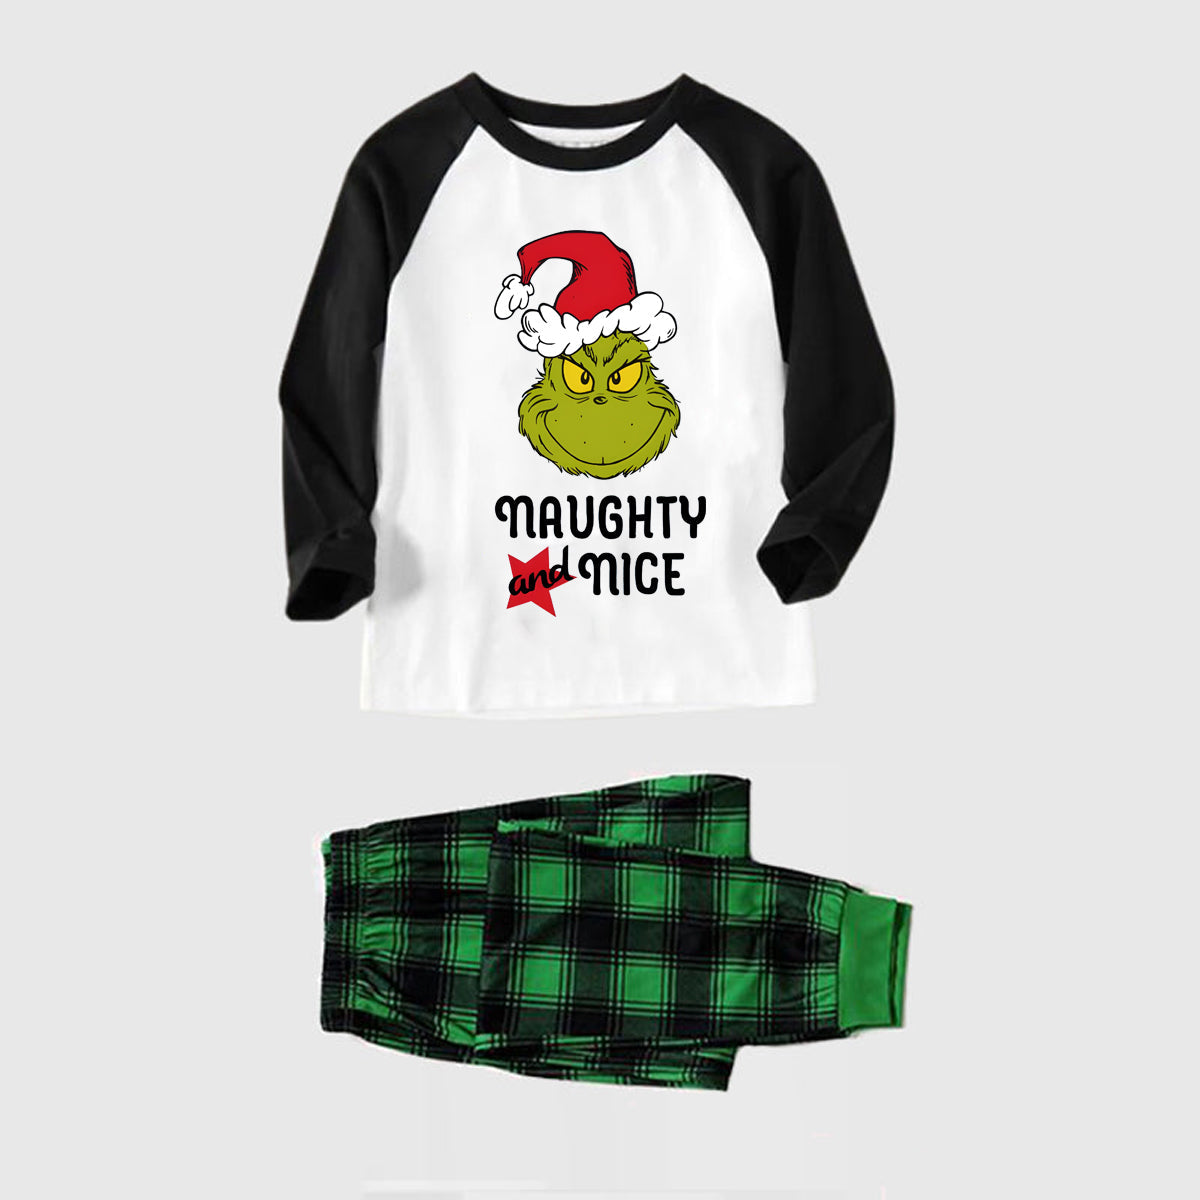 Christmas "Naughty&Nice" Letter Print Patterned Casual Long Sleeve Sweatshirts Black Contrast Top and Black and Green Plaid Pants Family Matching Pajamas Sets With Pet Bandana